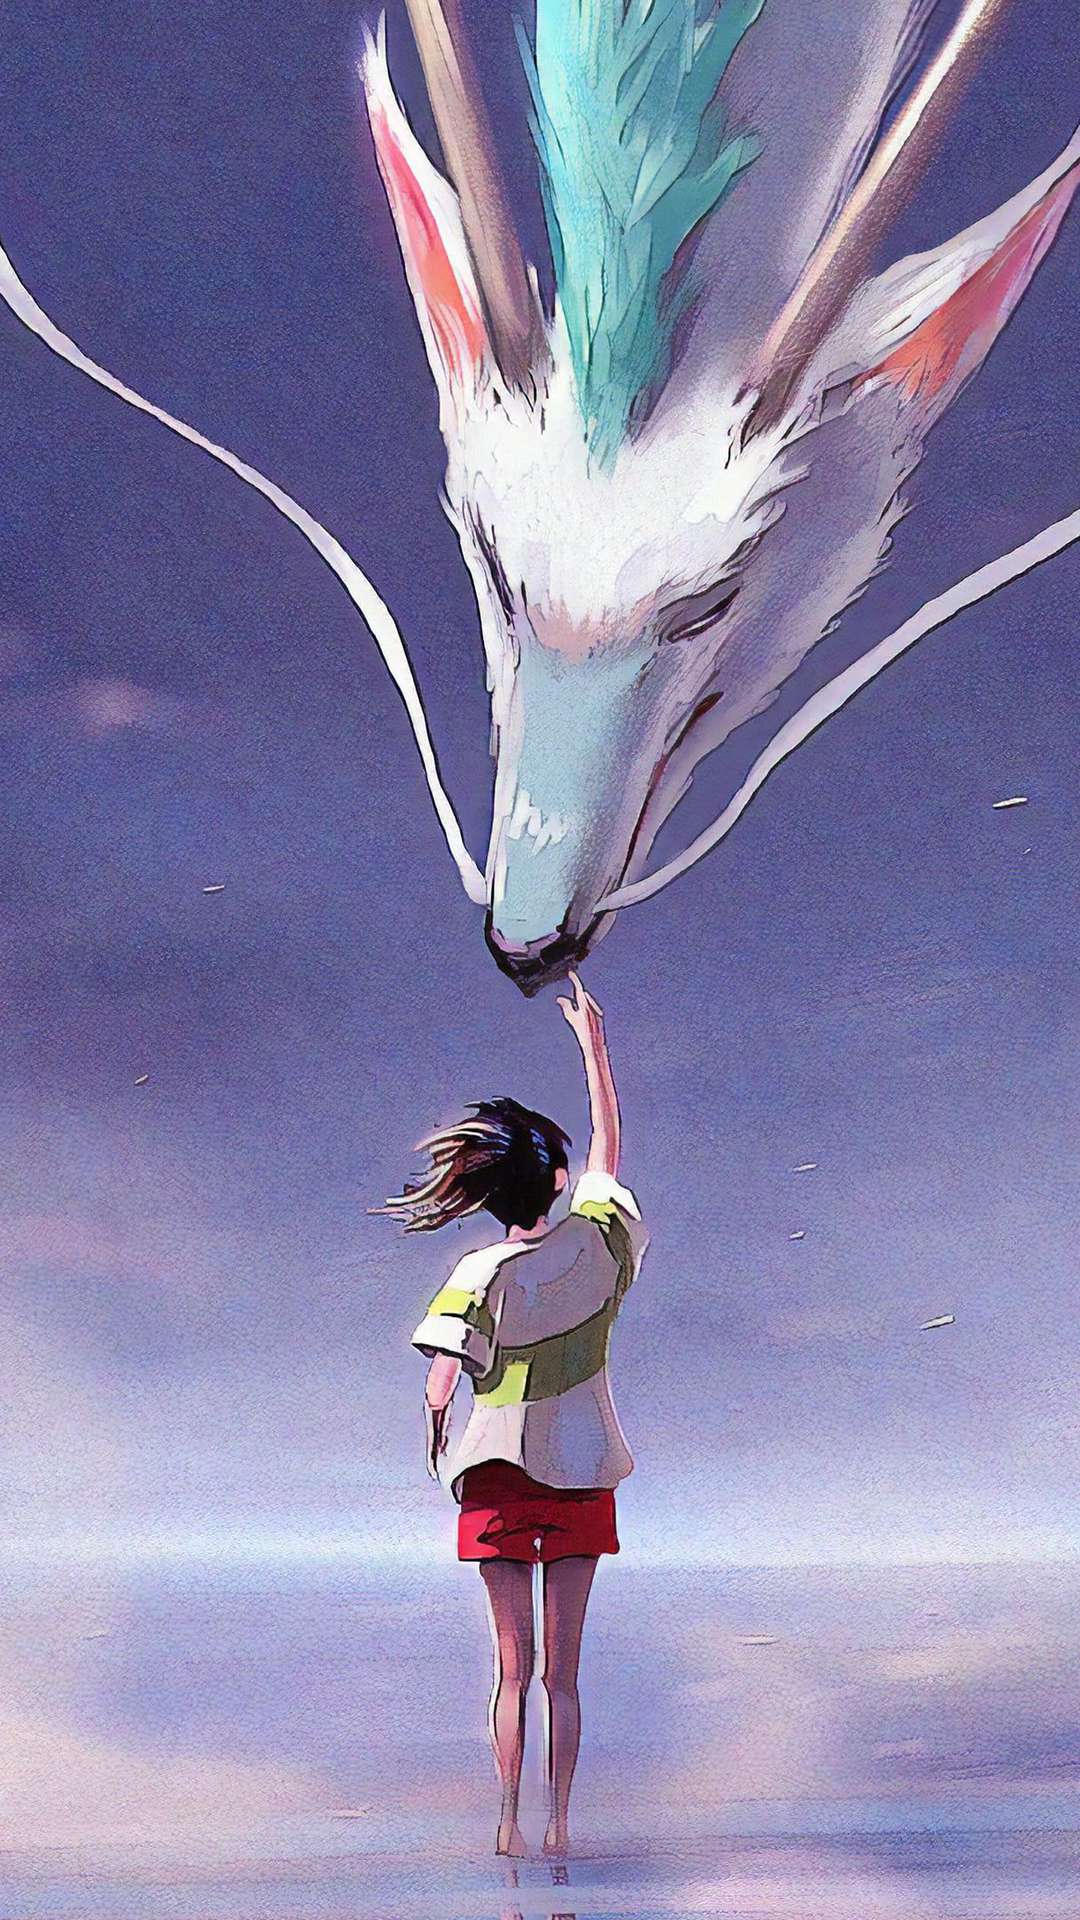 40+ Spirited Away Wallpapers for iPhone and Android by Christina Goodwin